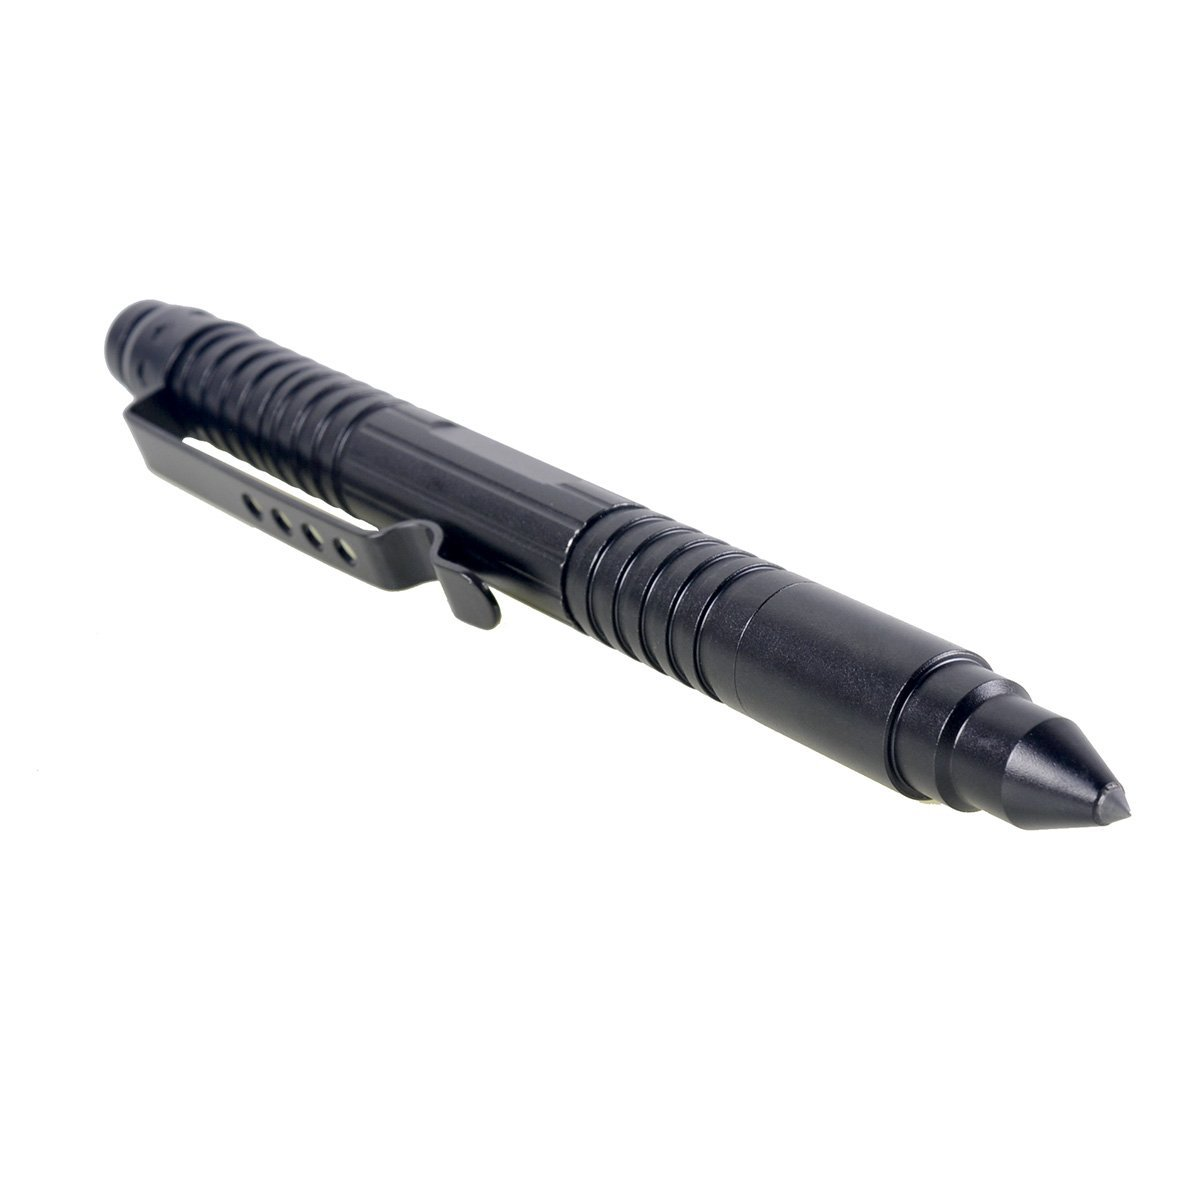 IFlying Tactical Pen Review